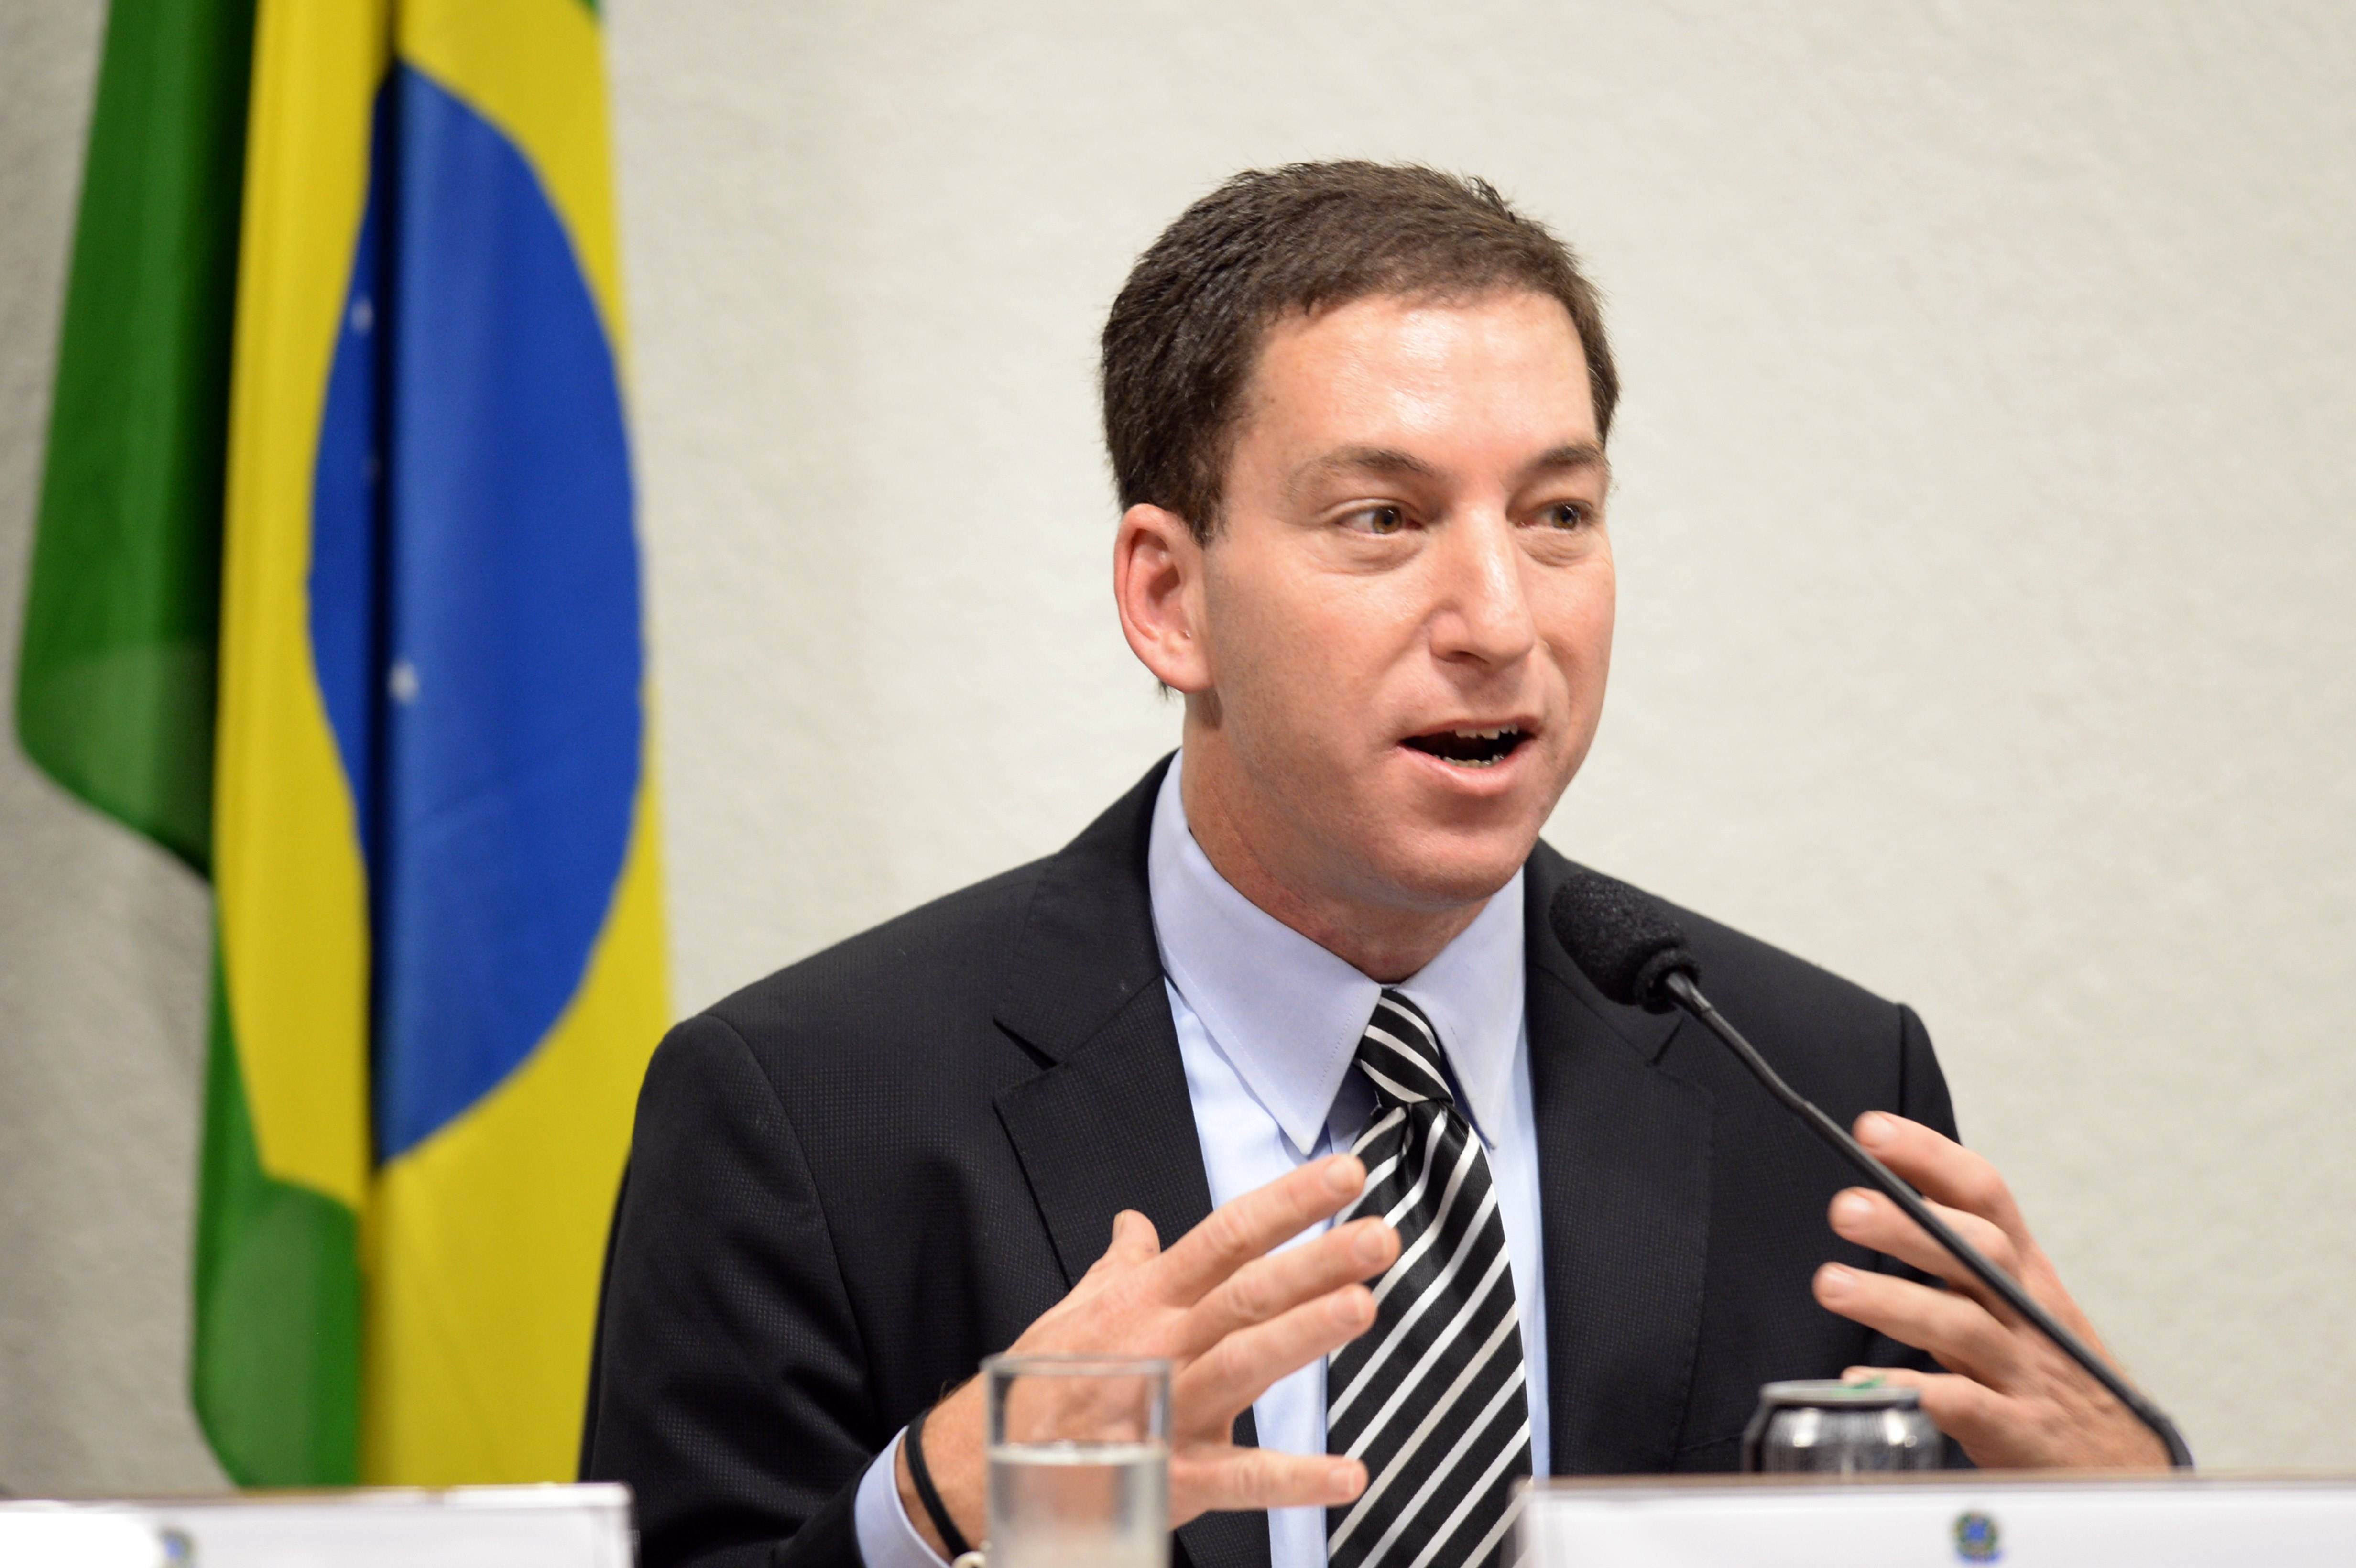 Brazil-based journalist Glenn Greenwald assisted Spanish newspaper El Mundo in getting access to NSA documents affecting Spain. Photo: AFP